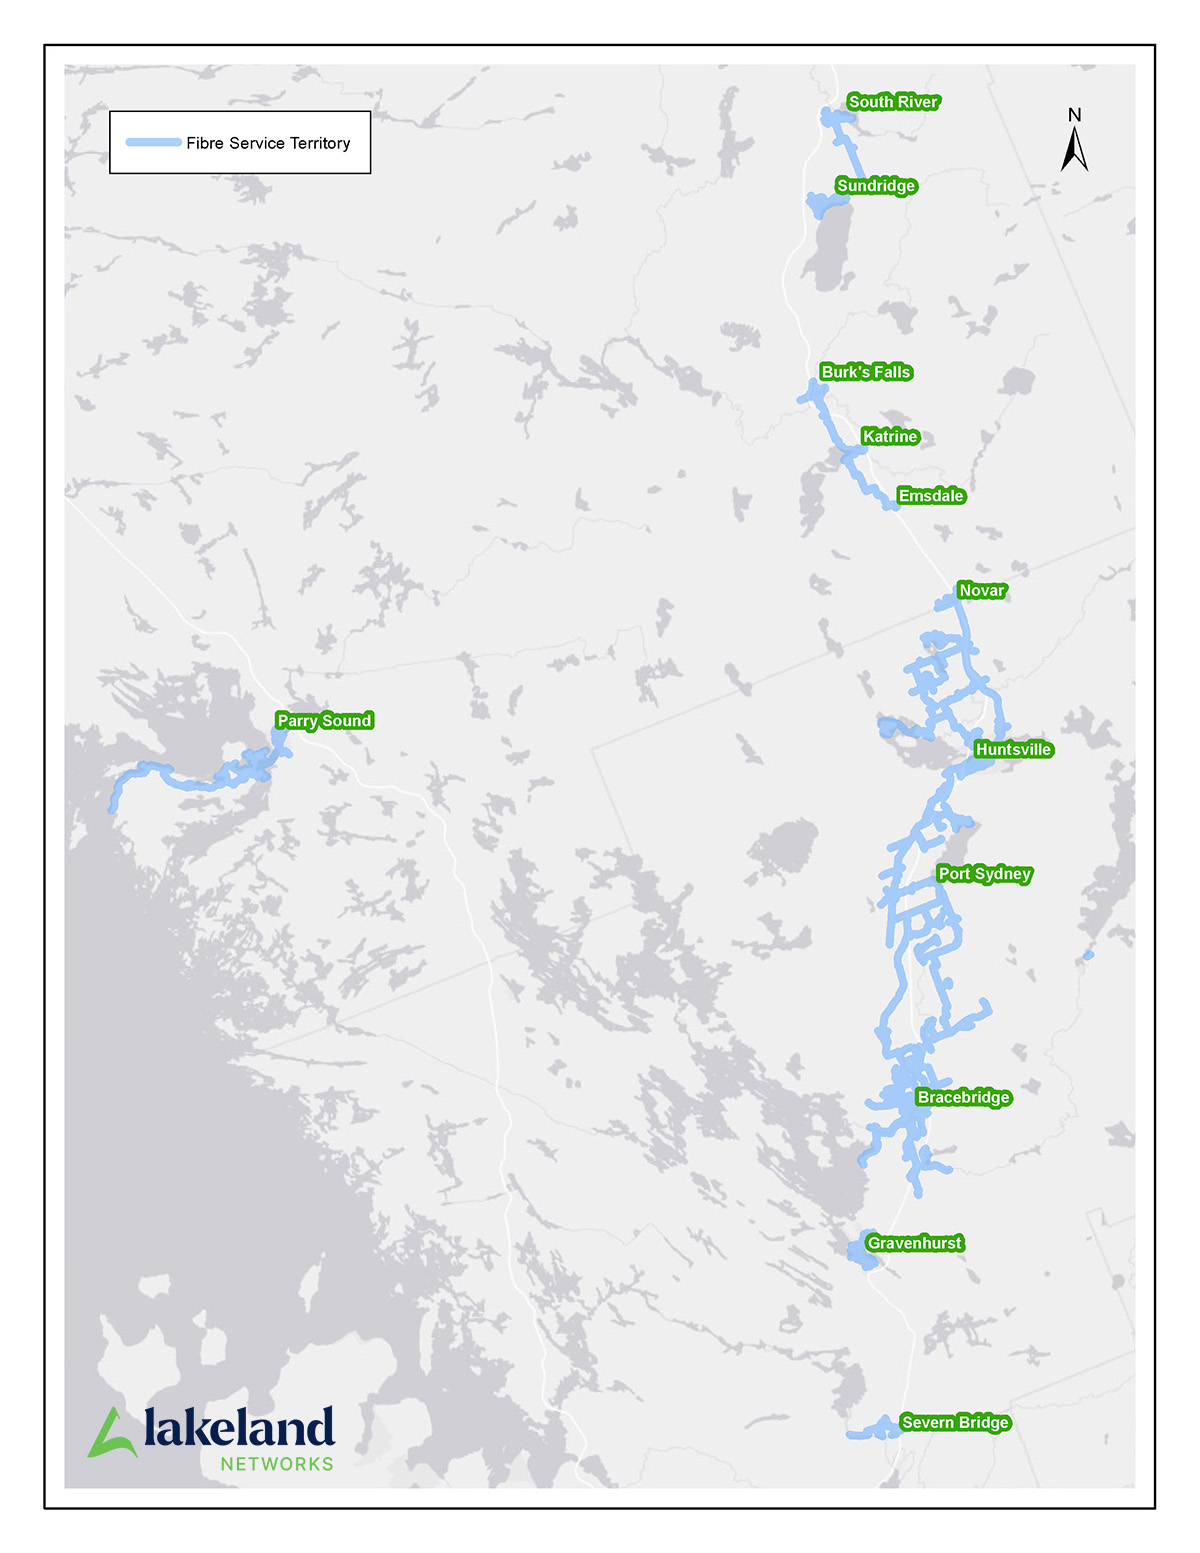 Map showing Lakeland Networks' fibre internet service area in Muskoka, Parry Sound and Almaguin.